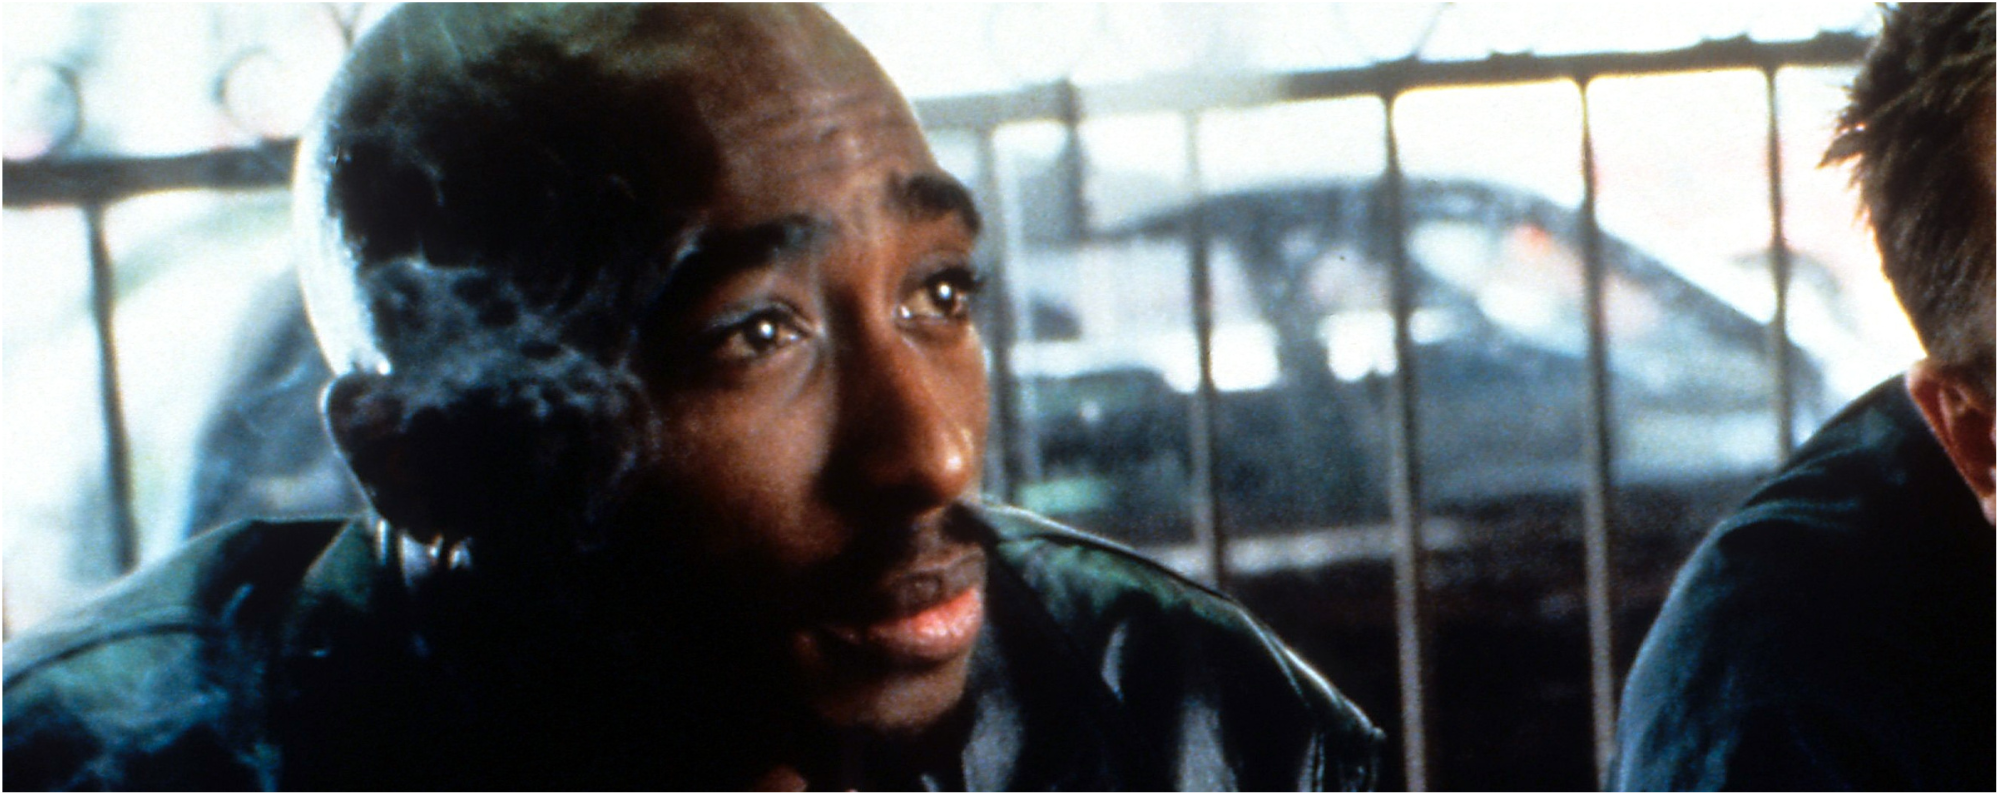 The Meaning Behind Tupac’s Ominous Hit “Hail Mary”